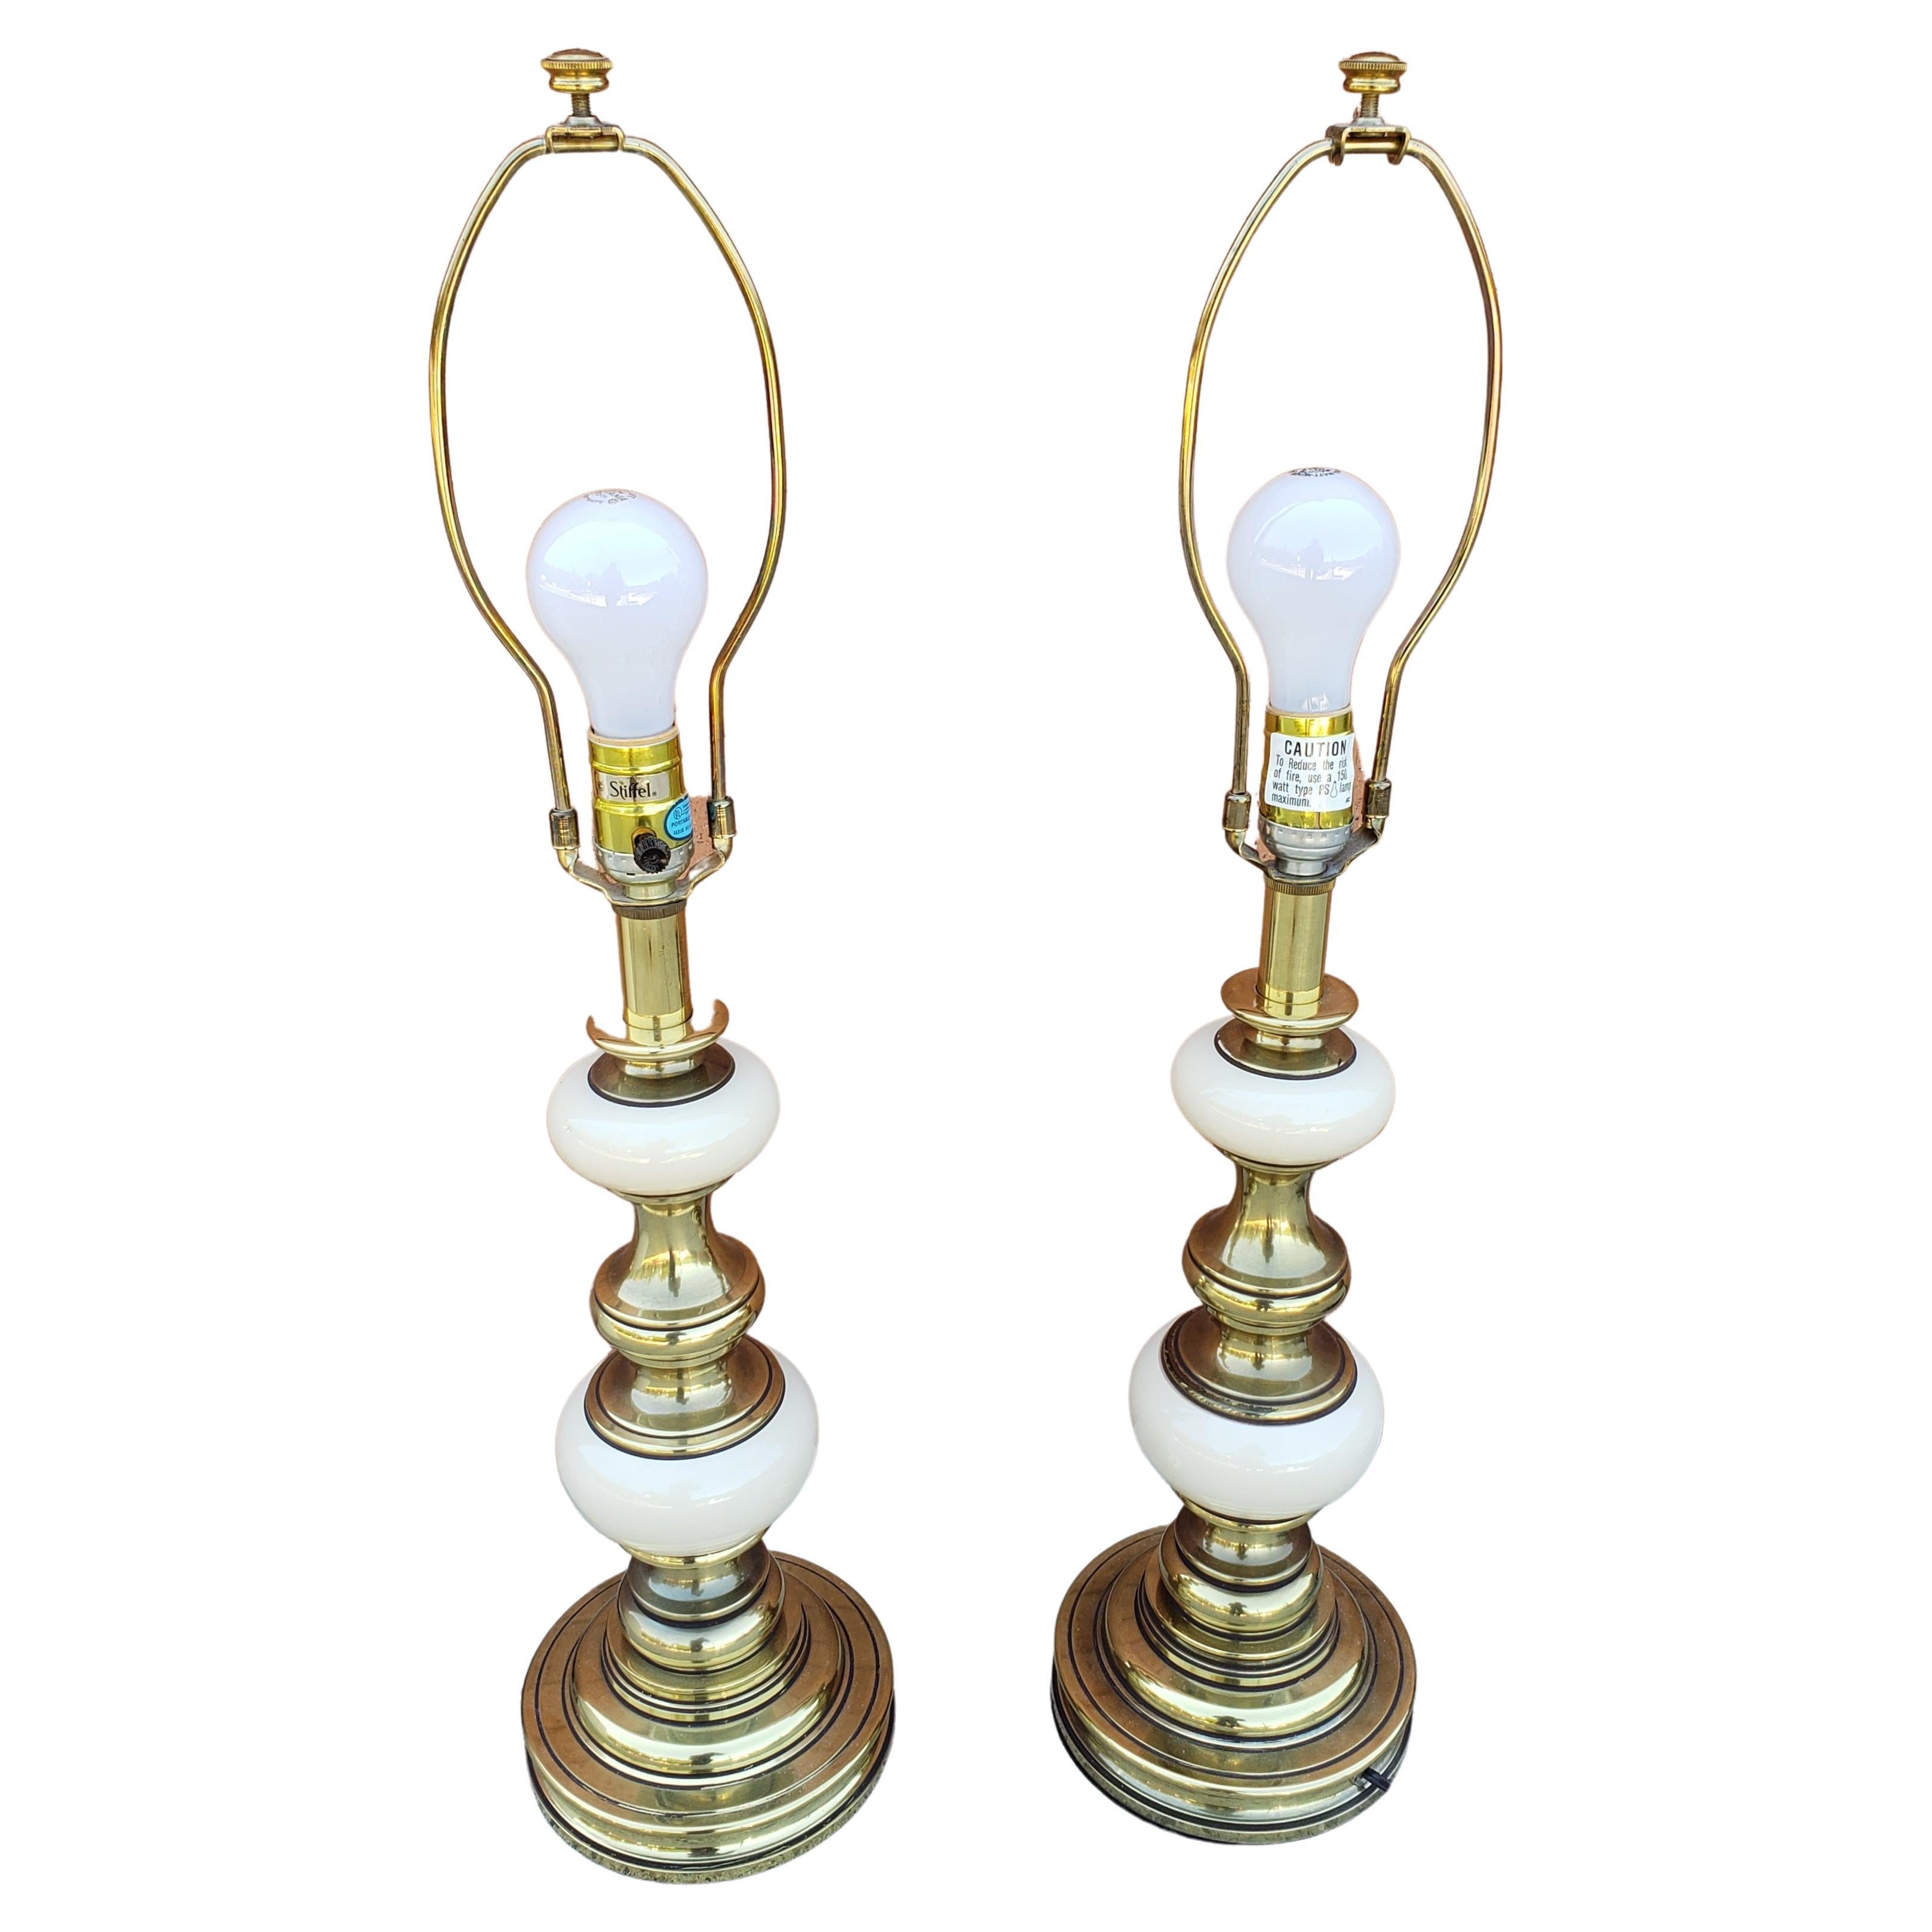 An exquisite pair of Victorian style solid brass and porcelain table lamps by Stiffel. Very good vintage condition. Comes with Stiffel original shades in good vintage condition. Measure 6.5